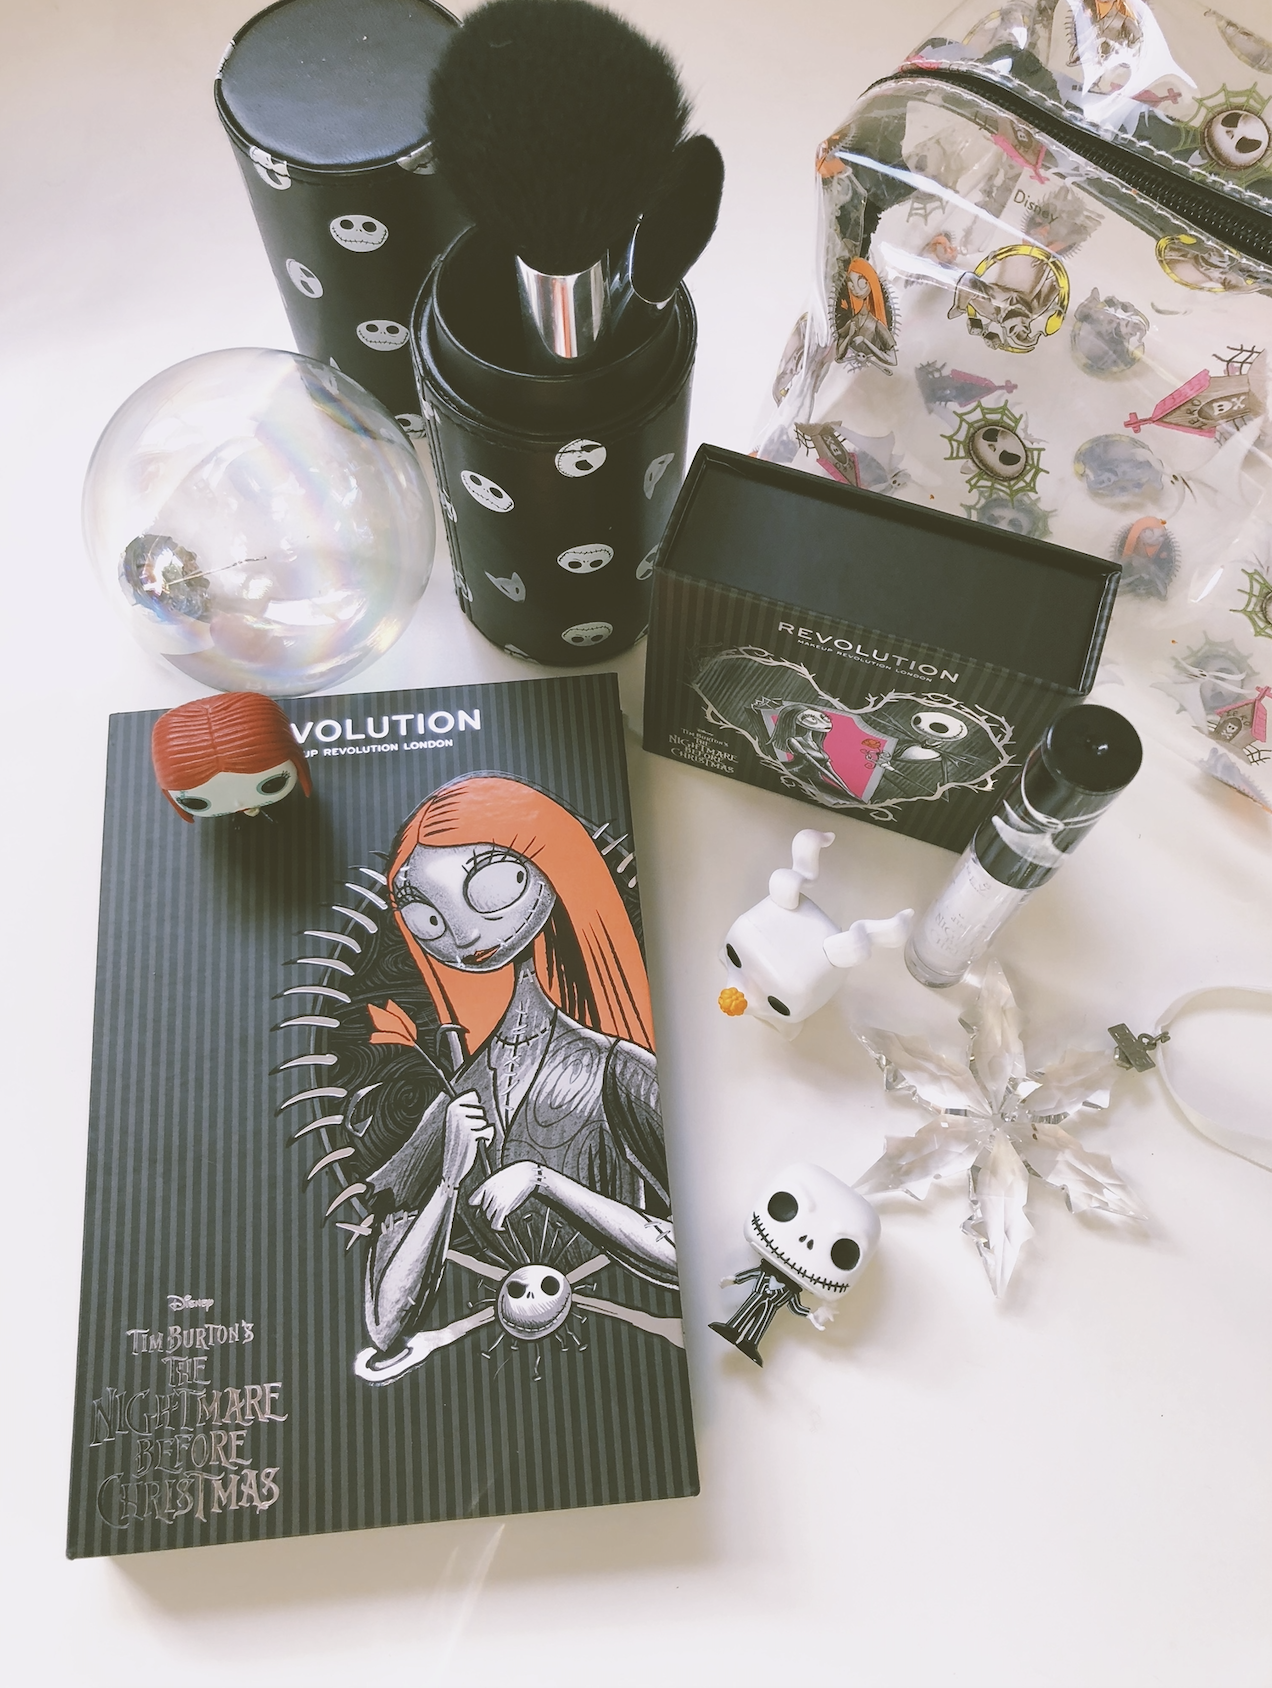 The Nightmare Before Christmas Makeup Revolution Beauty Review